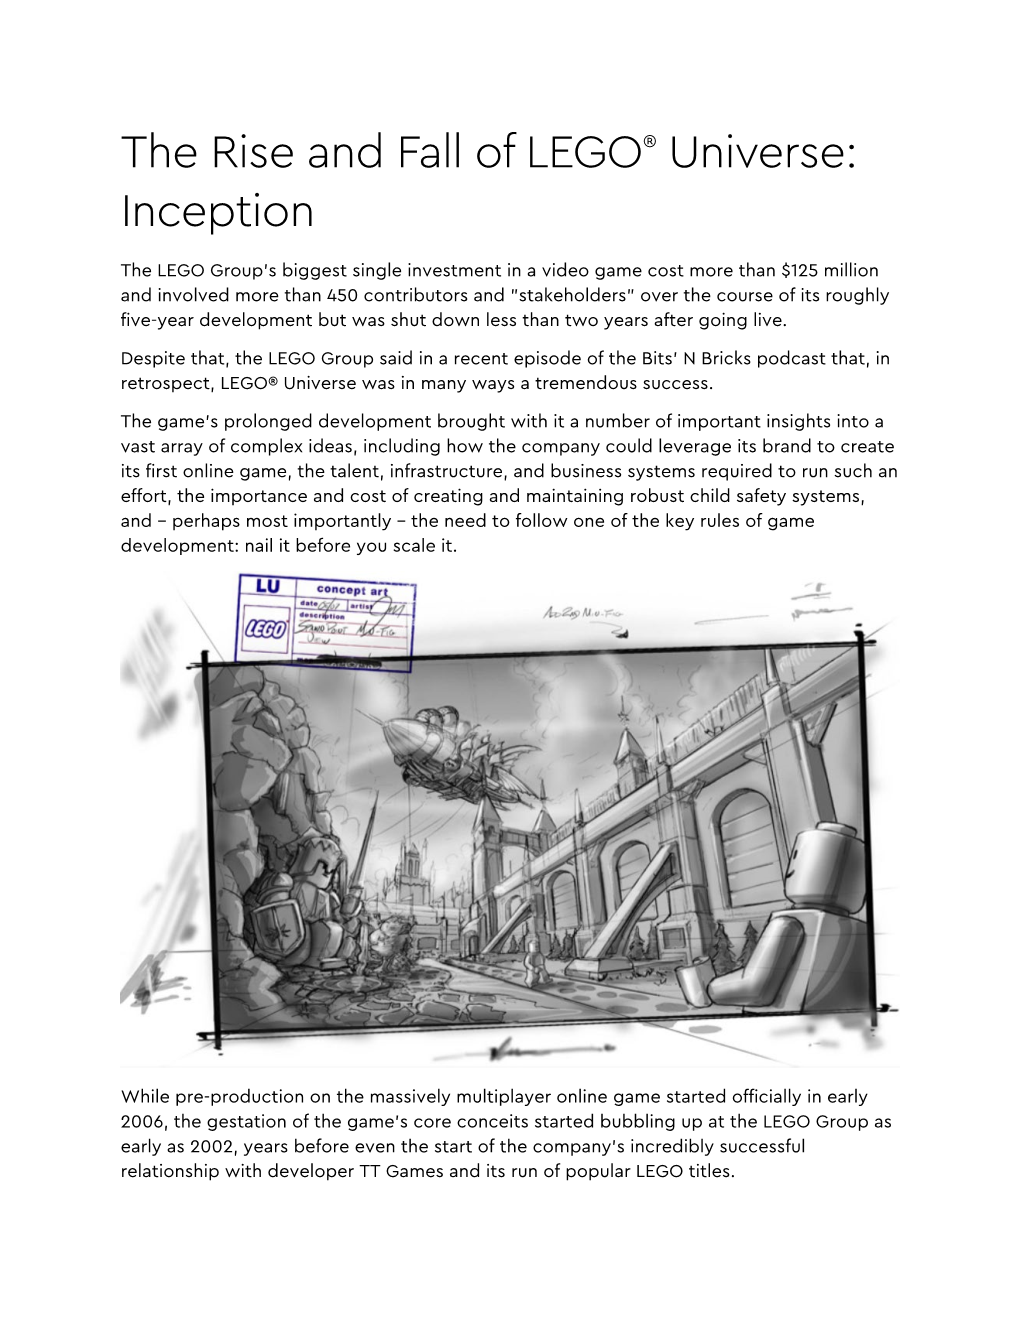 The Rise and Fall of LEGO® Universe: Inception